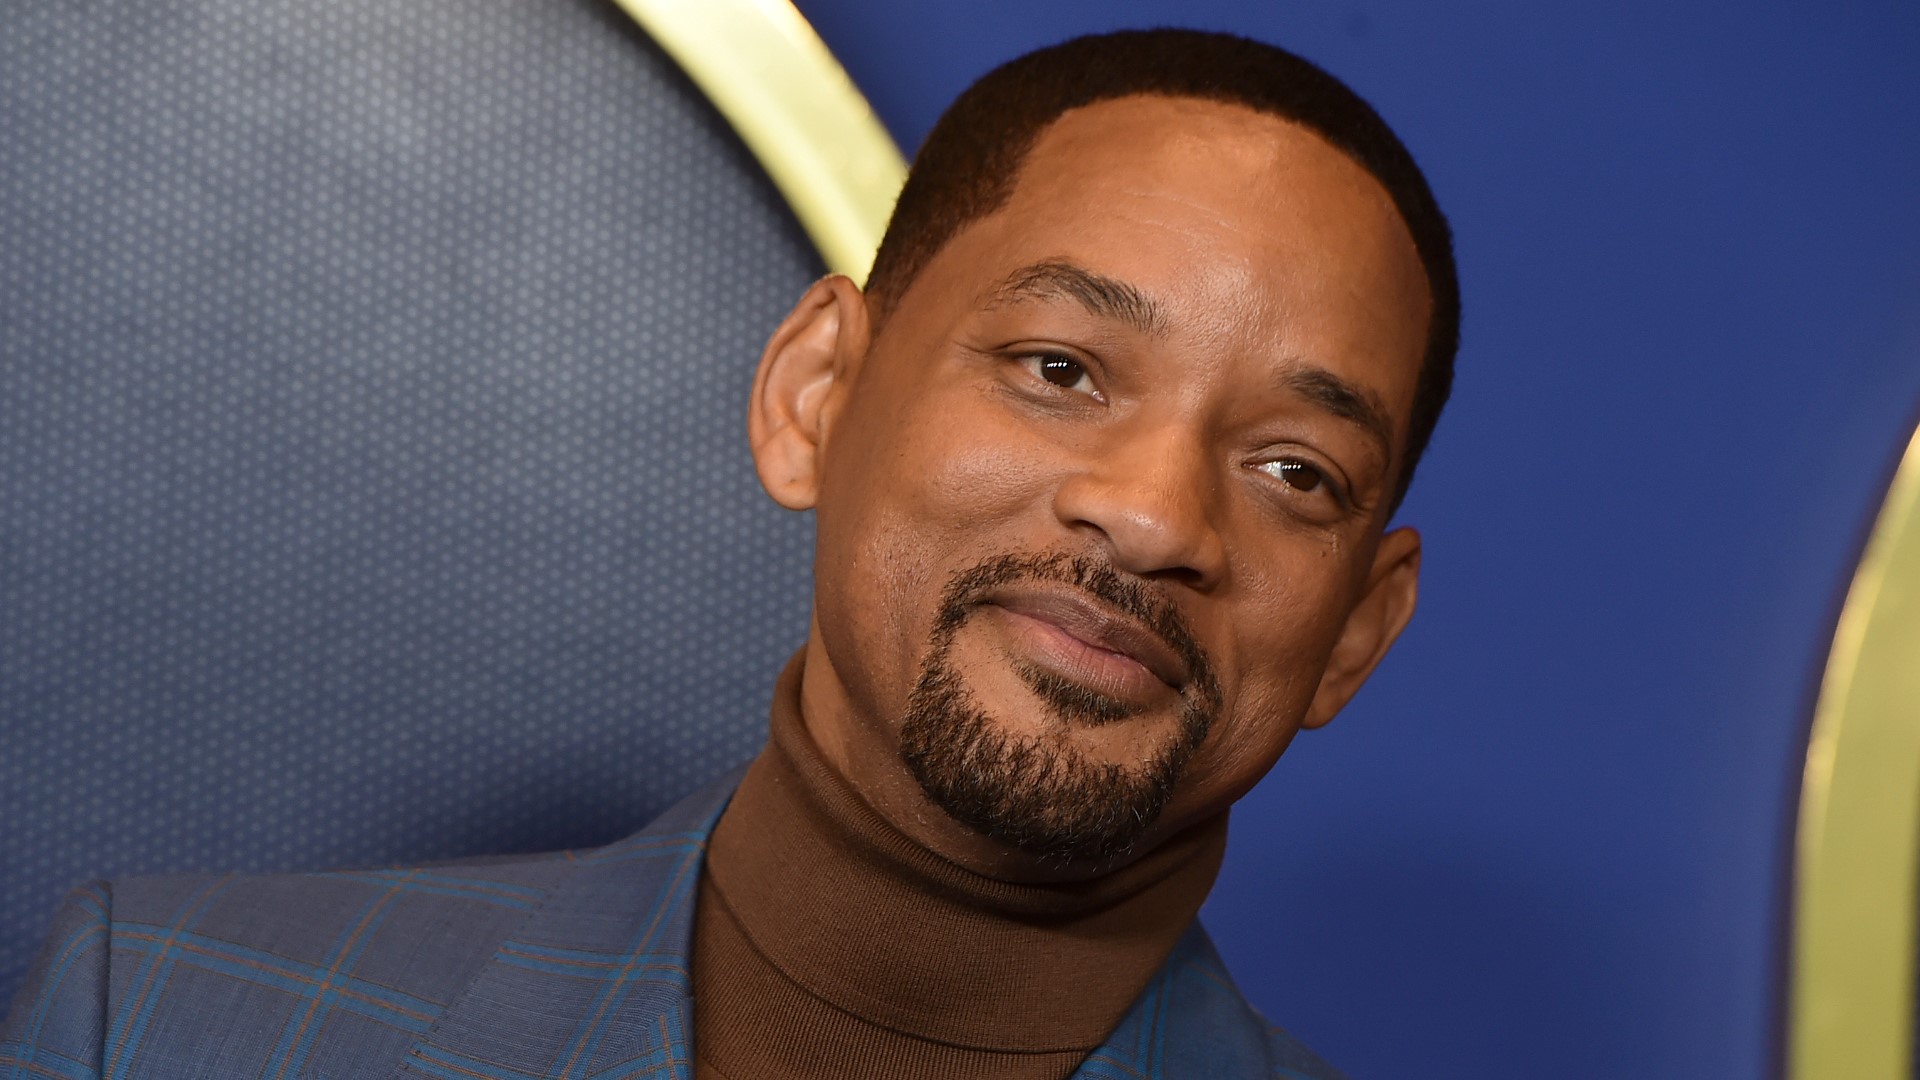 Will Smith is speaking out publicly on camera for the first time since he slapped comedian Chris Rock at the Oscars.